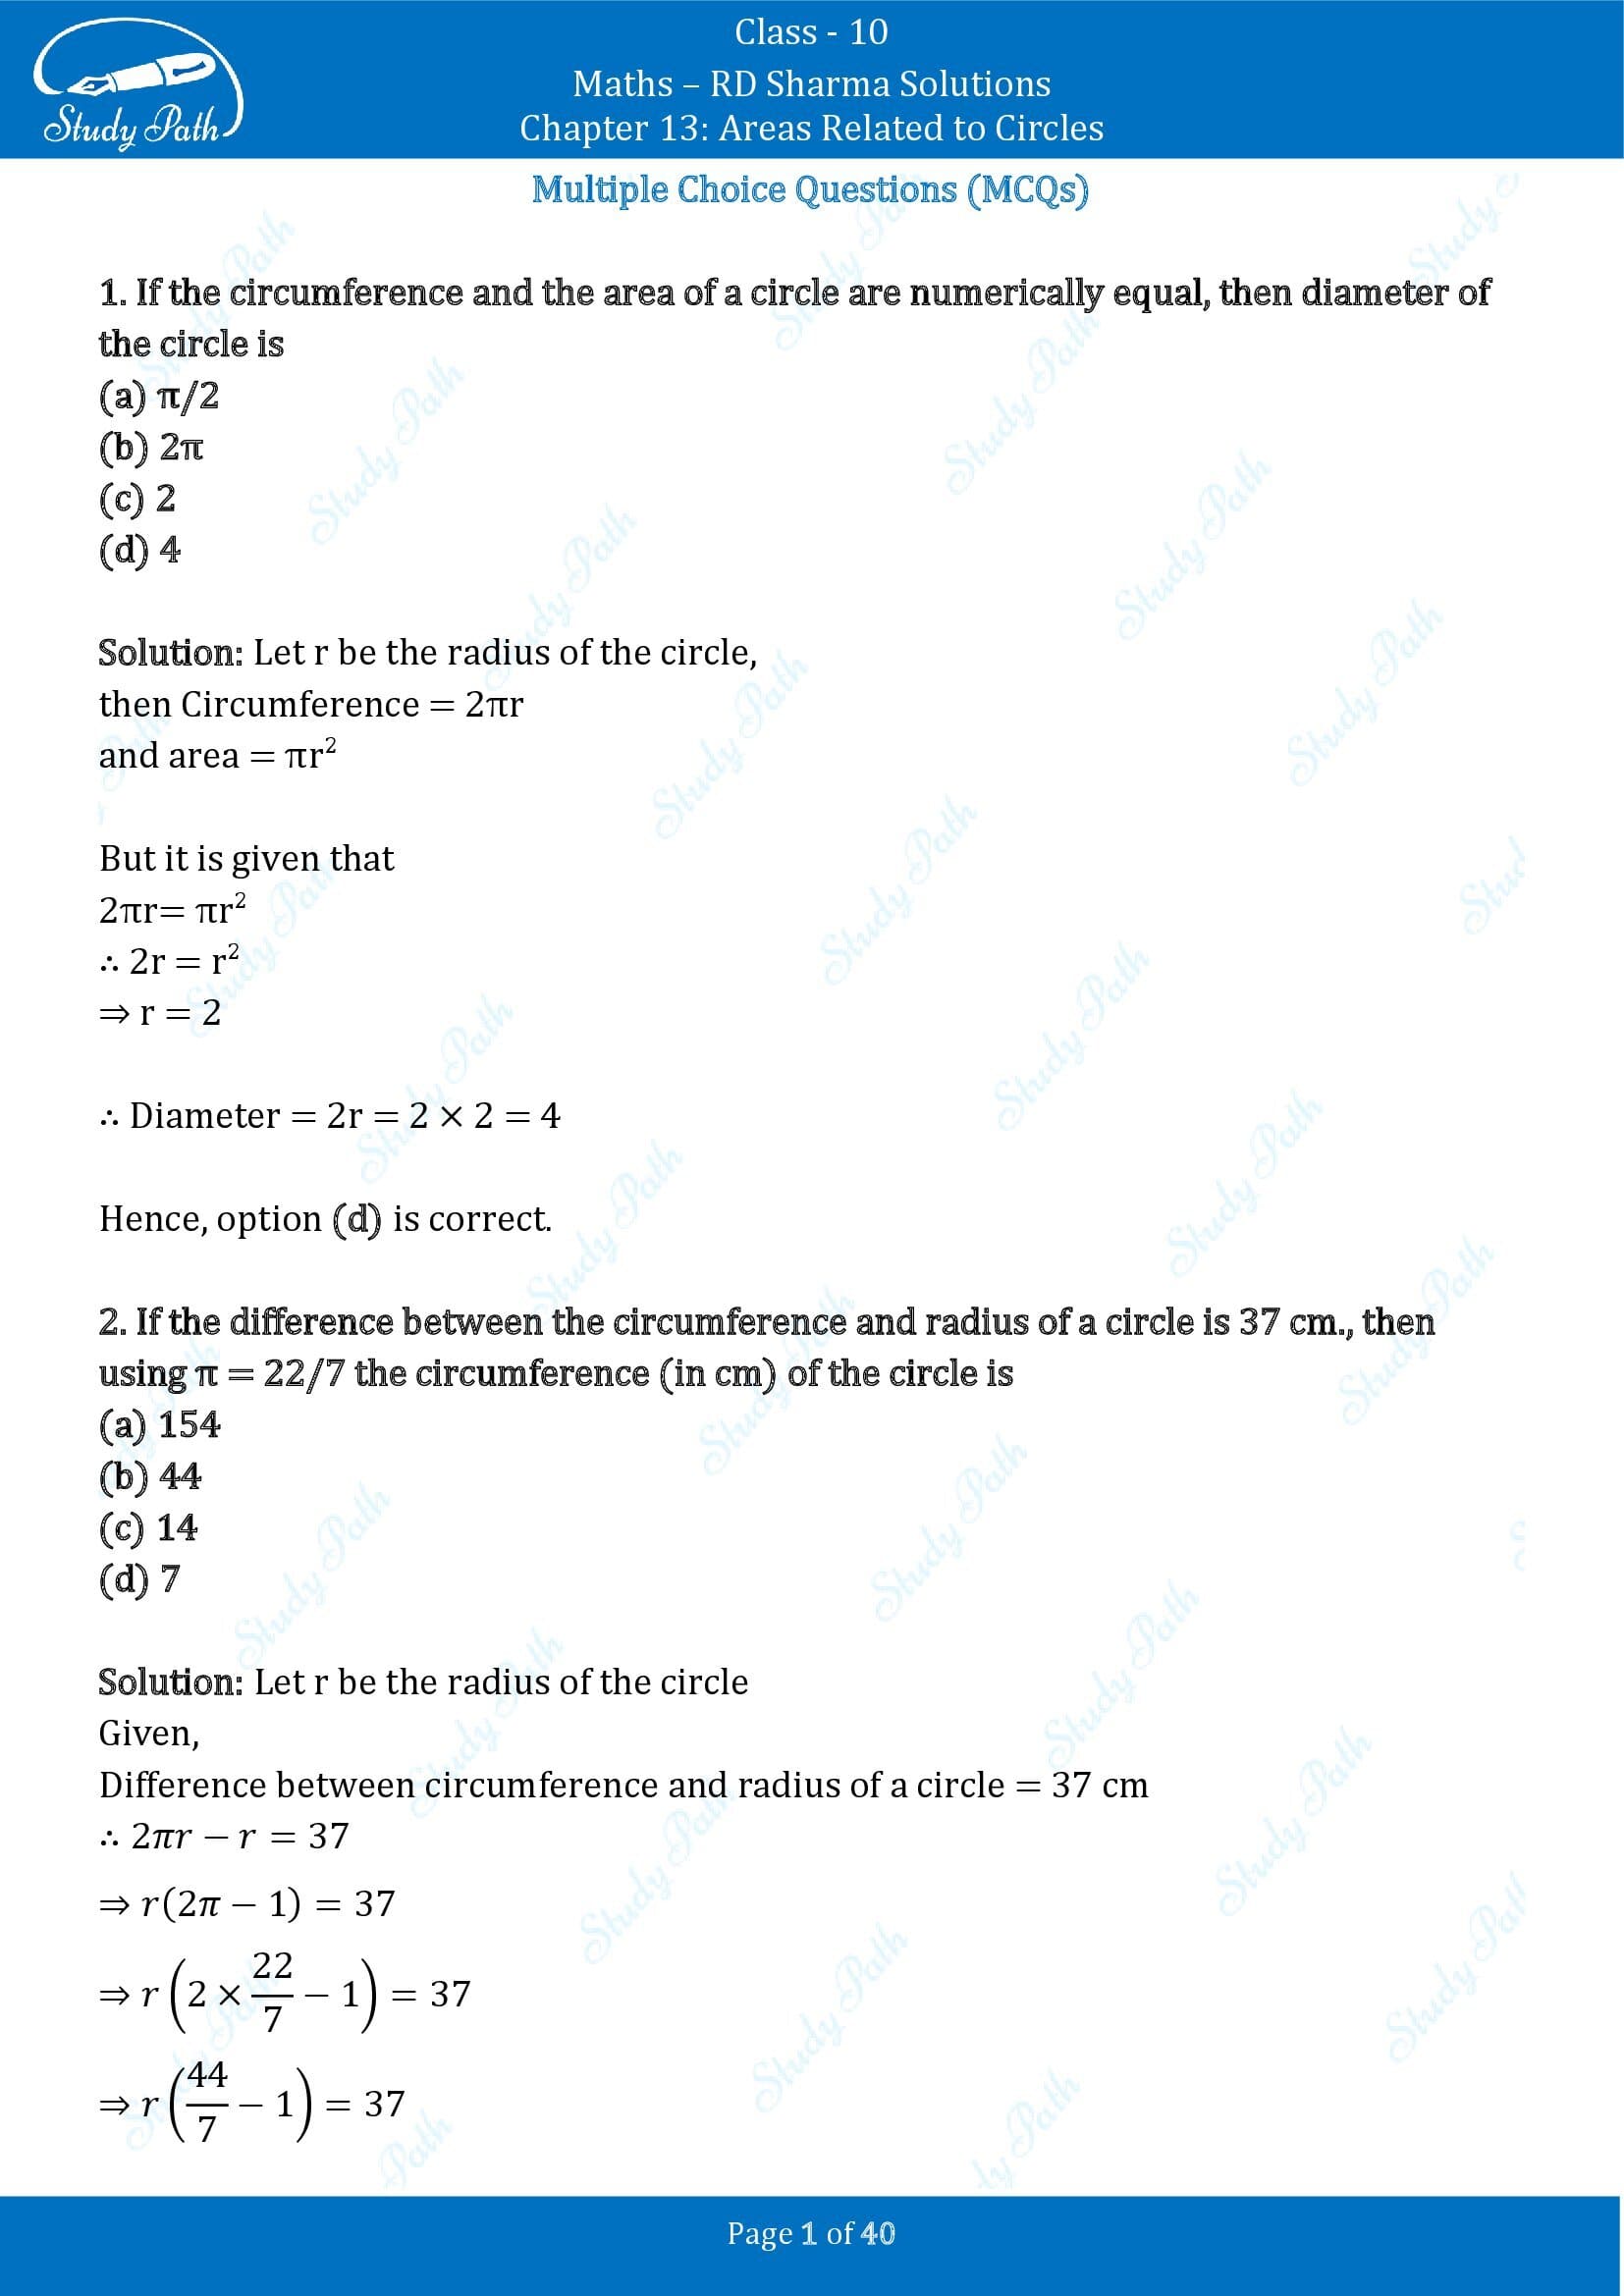 RD Sharma Solutions Class 10 Chapter 13 Areas Related to Circles Multiple Choice Question MCQs 00001